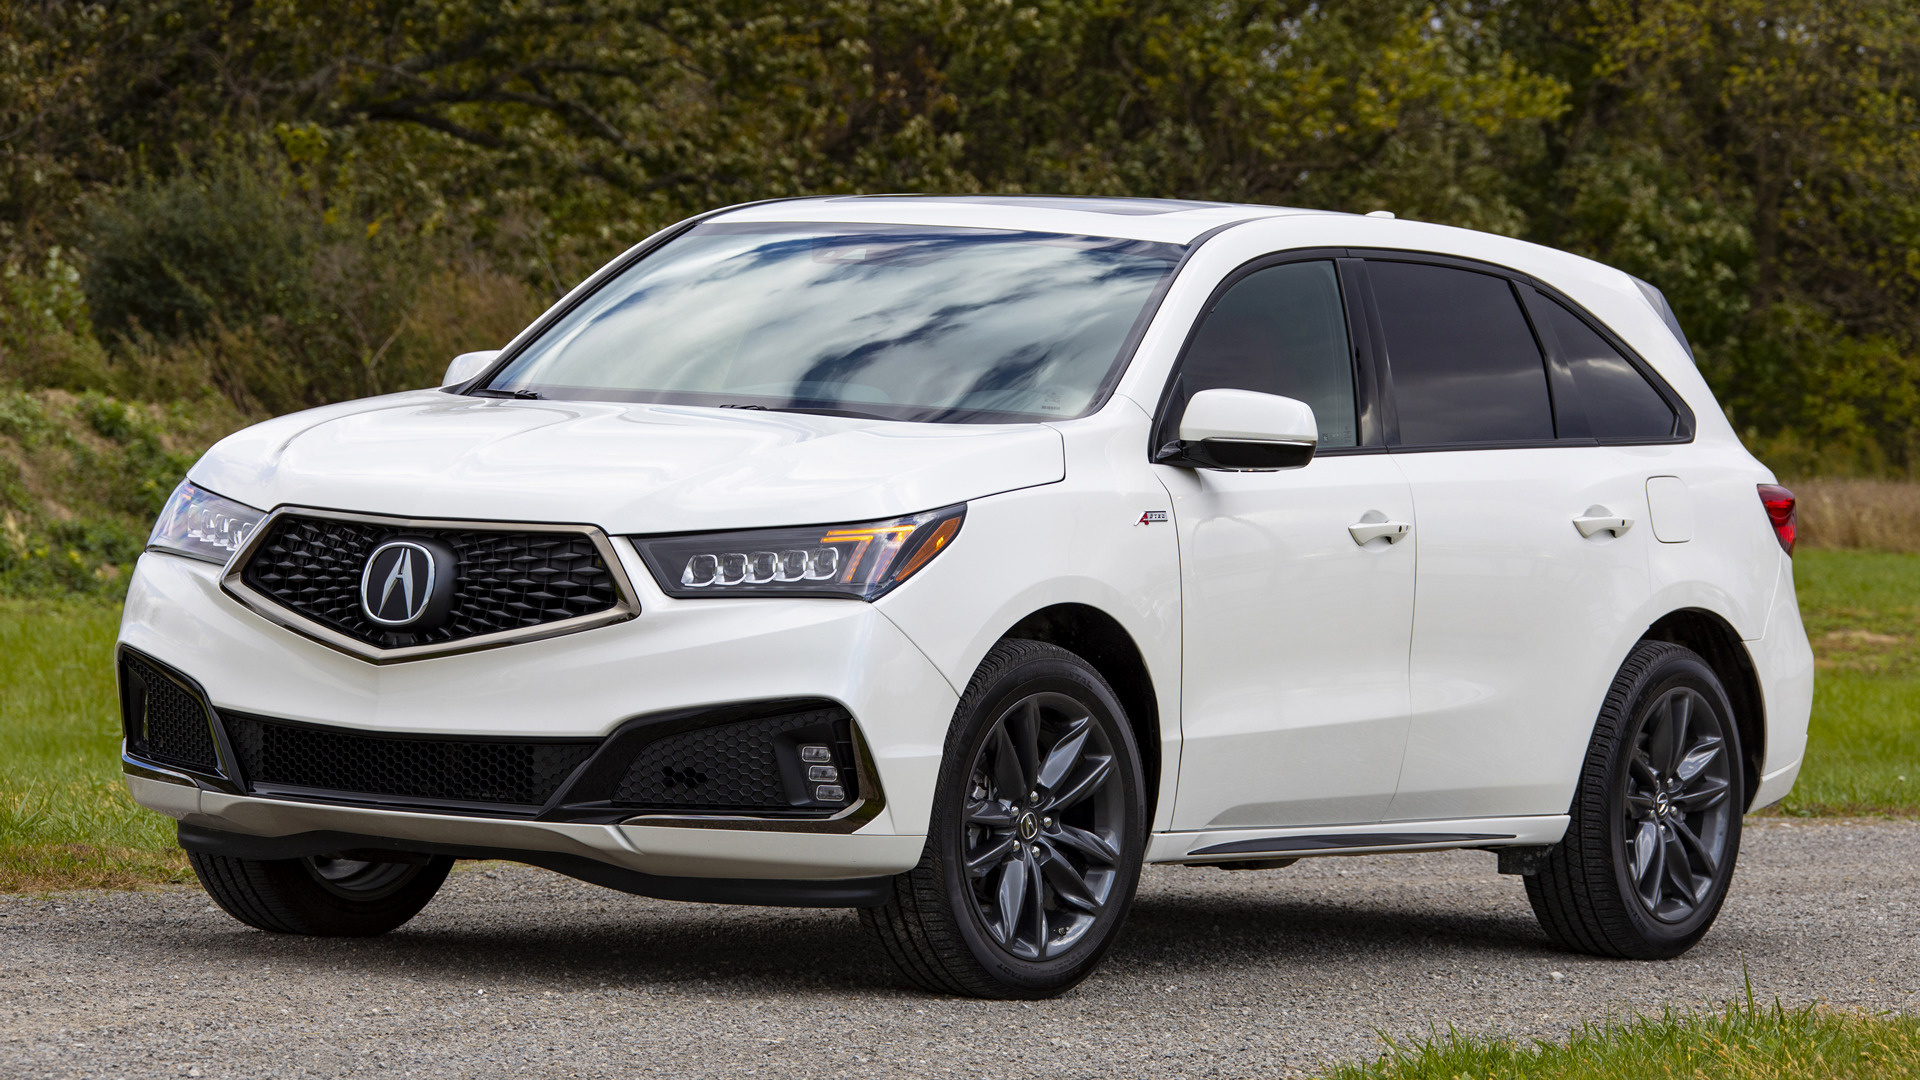 2019 Acura Mdx A Spec Wallpapers And Hd Images Car Pixel